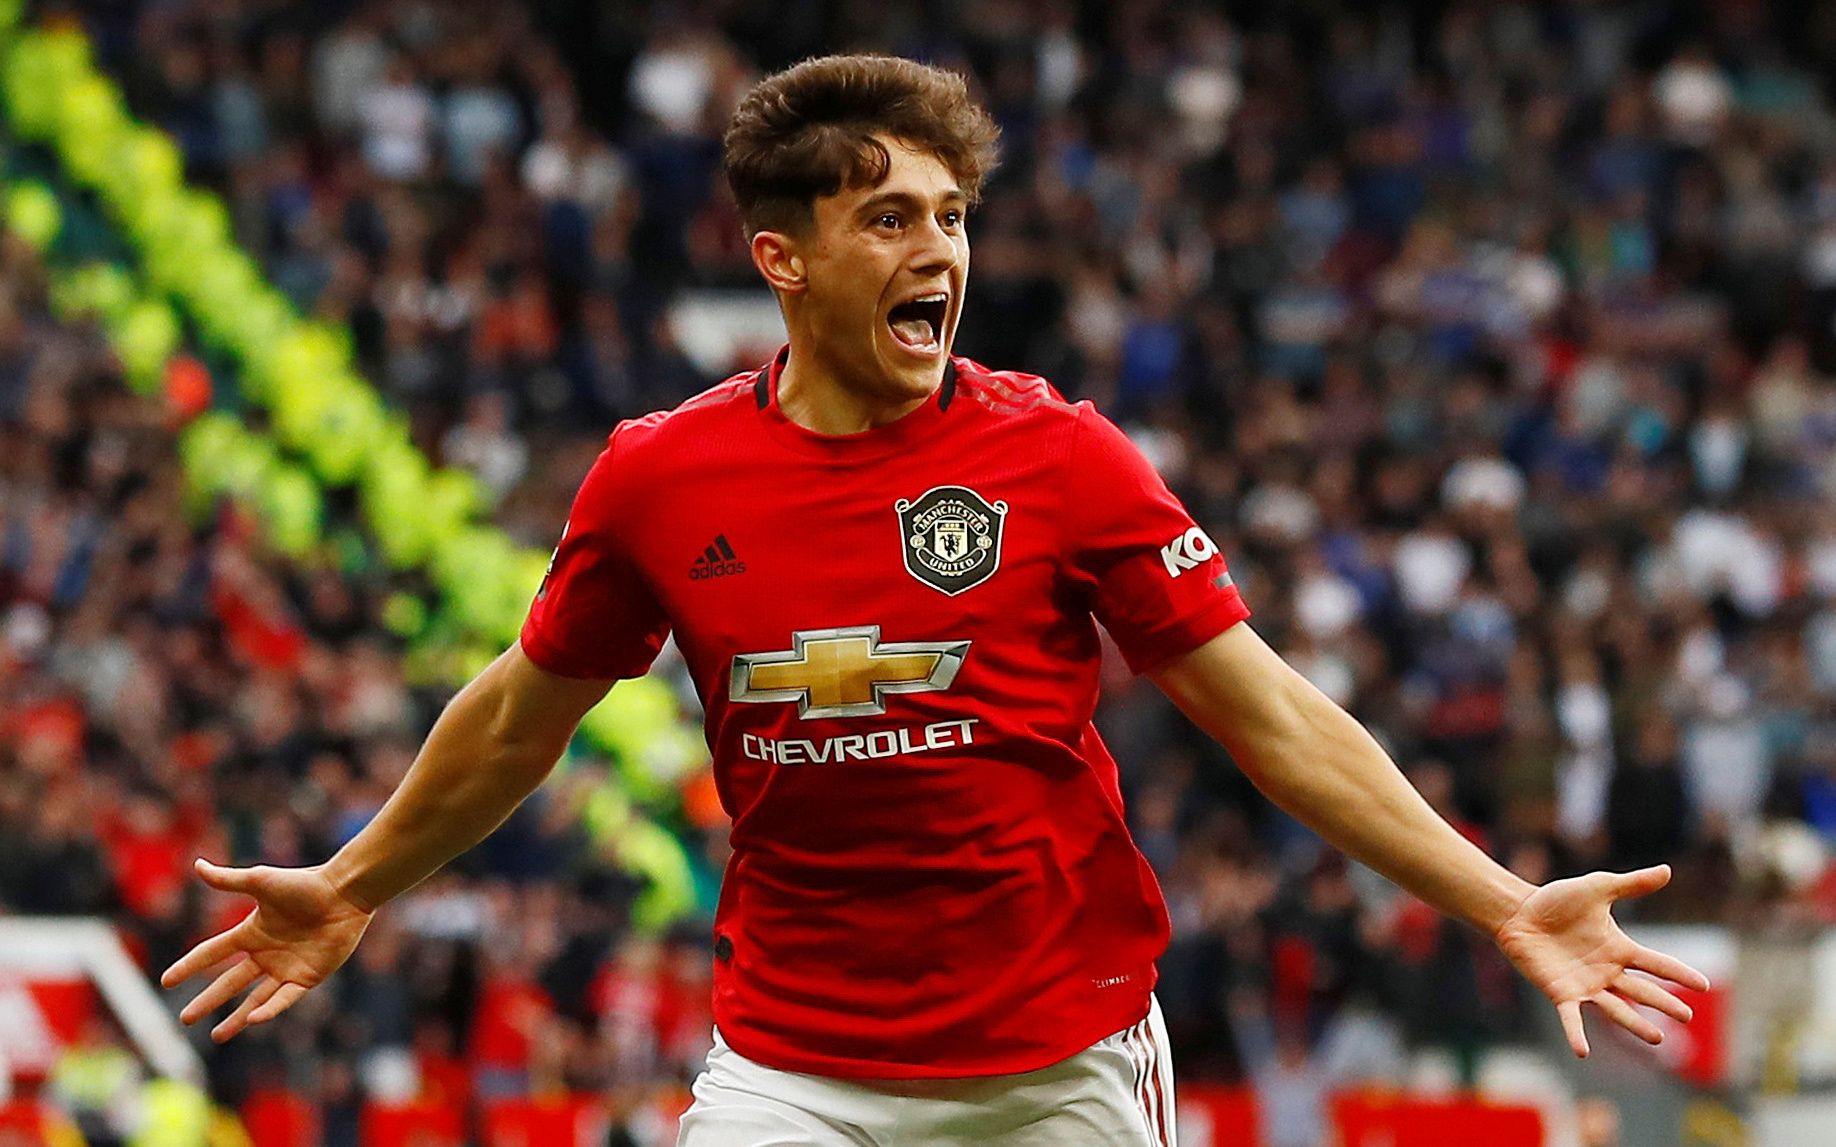 Soccer Football - Premier League - Manchester United v Chelsea - Old Trafford, Manchester, Britain - August 11, 2019  Manchester United's Daniel James celebrates scoring their fourth goal   Action Images via Reuters/Jason Cairnduff  EDITORIAL USE ONLY. No use with unauthorized audio, video, data, fixture lists, club/league logos or 